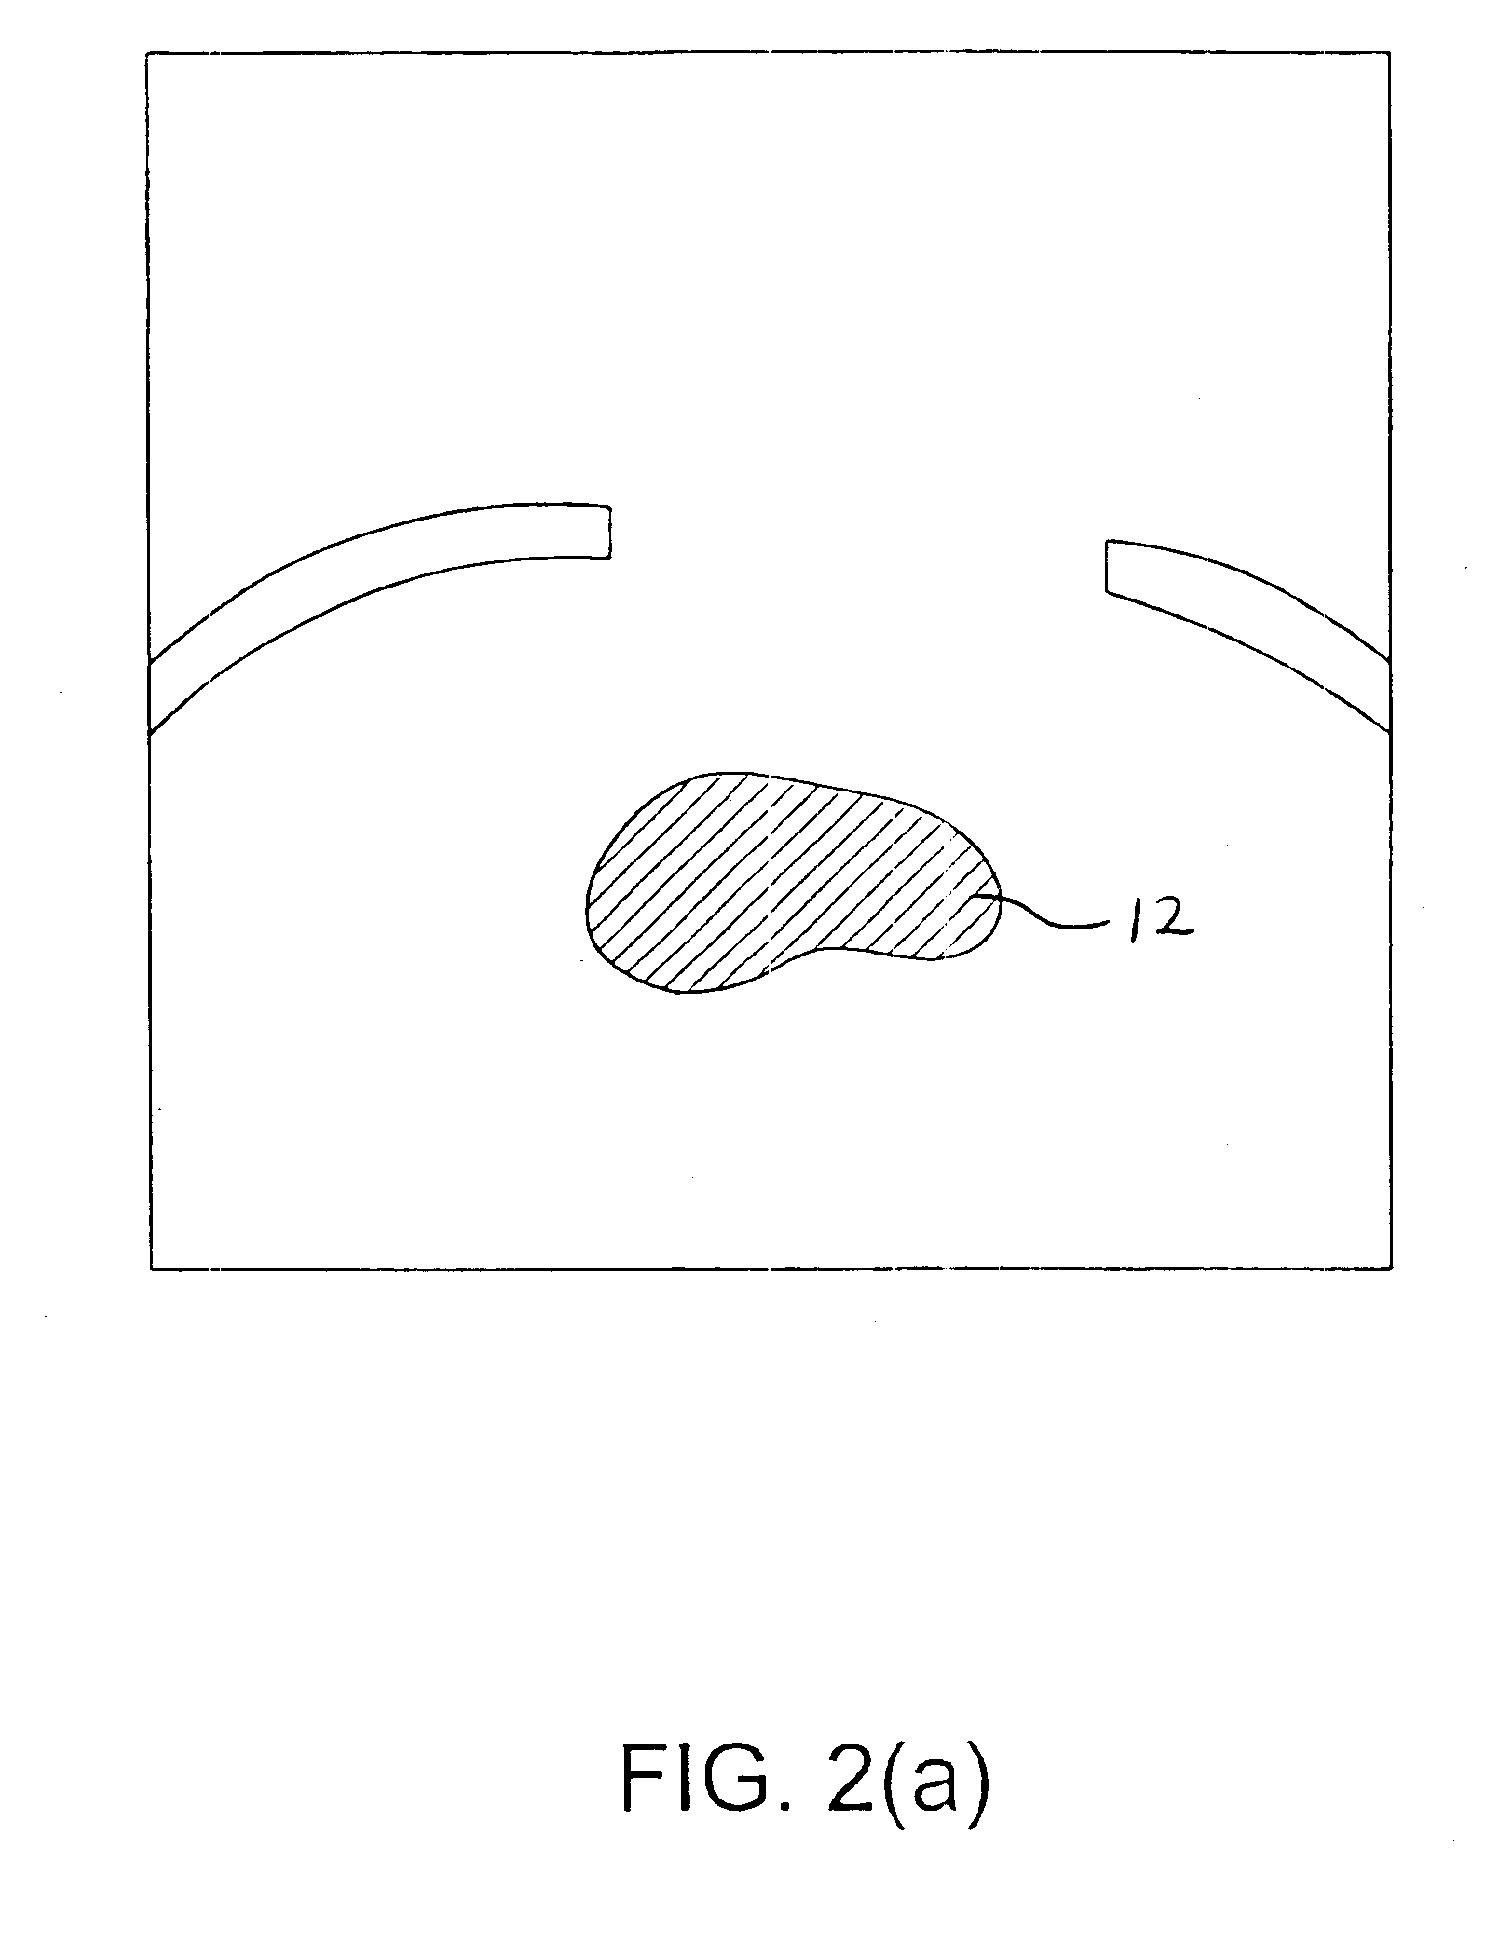 Method of treating a tumor by pre-irradiation